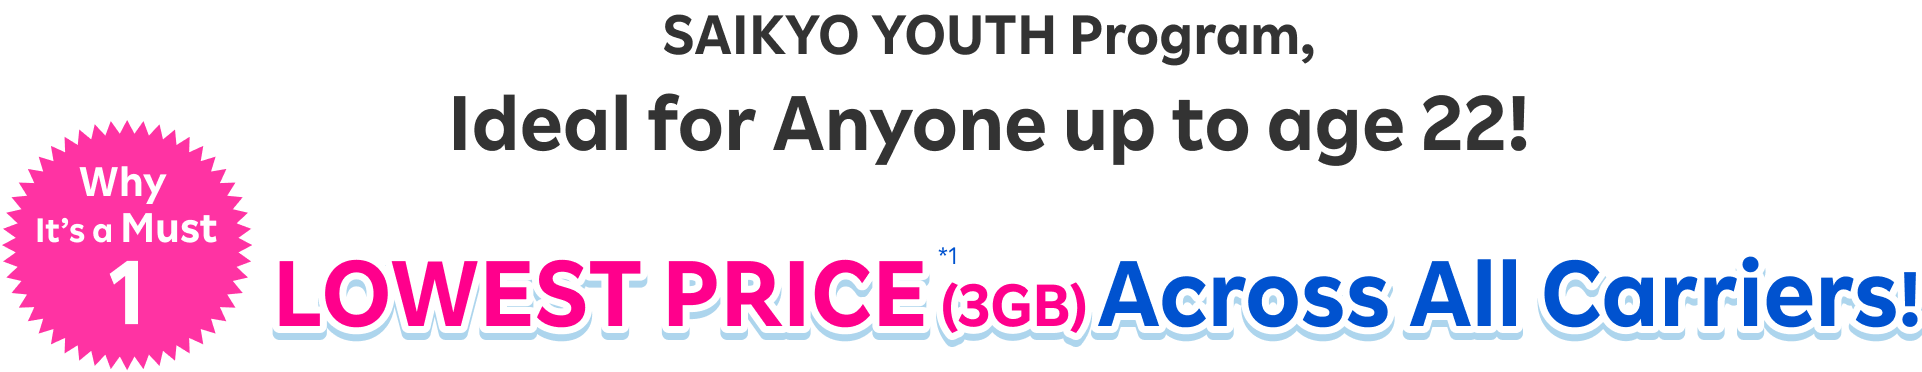 SAIKYO YOUTH Program, Ideal for Anyone up to age 22! LOWEST PRICE (3GB) Across All Carriers!